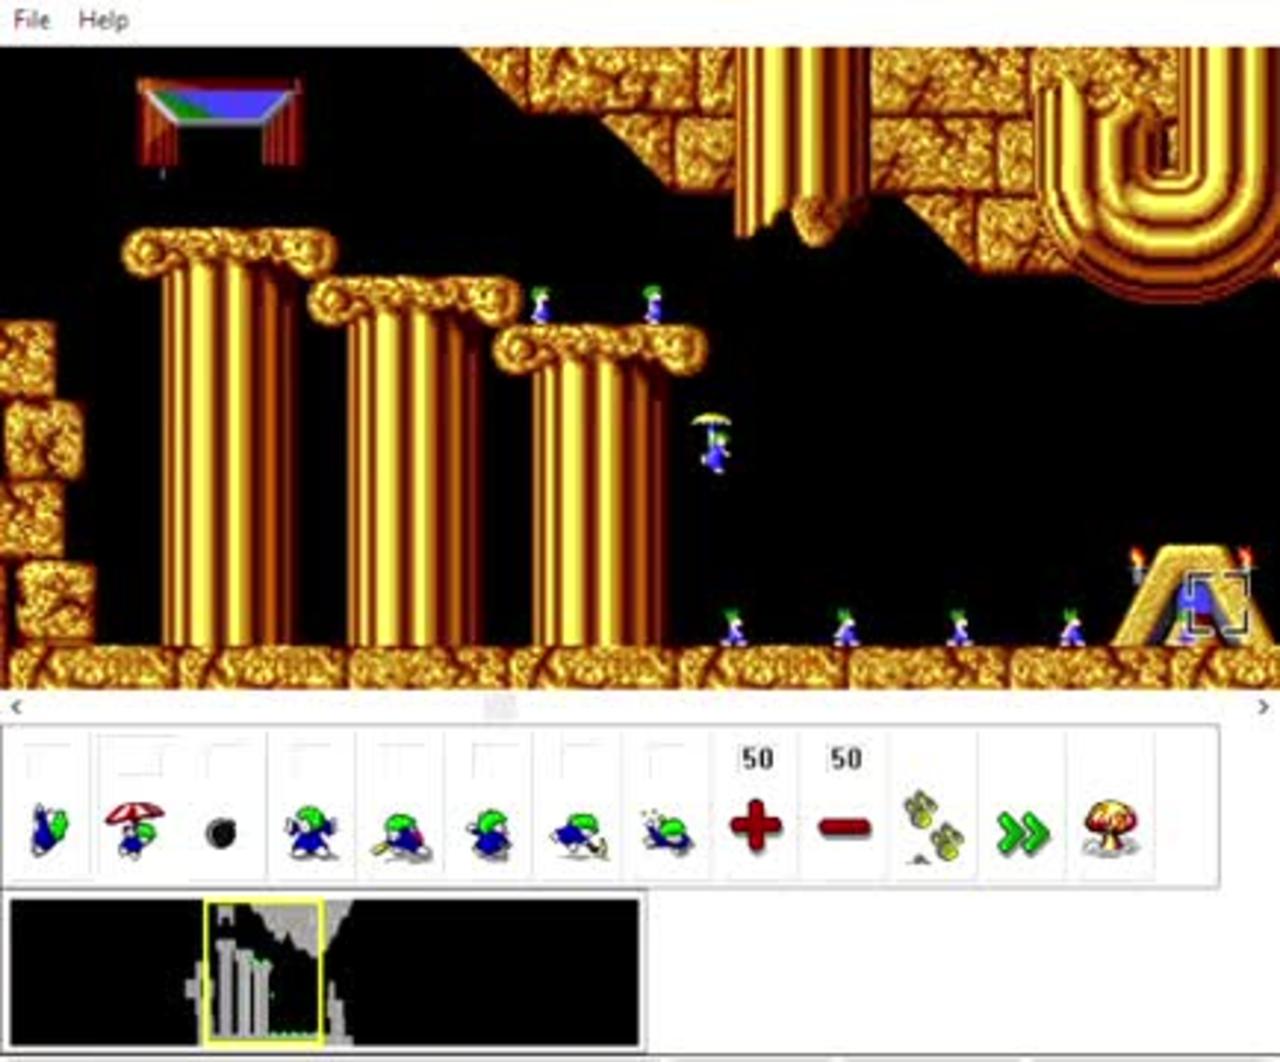 Lemmings 95: Fun level, Only floaters can survive this